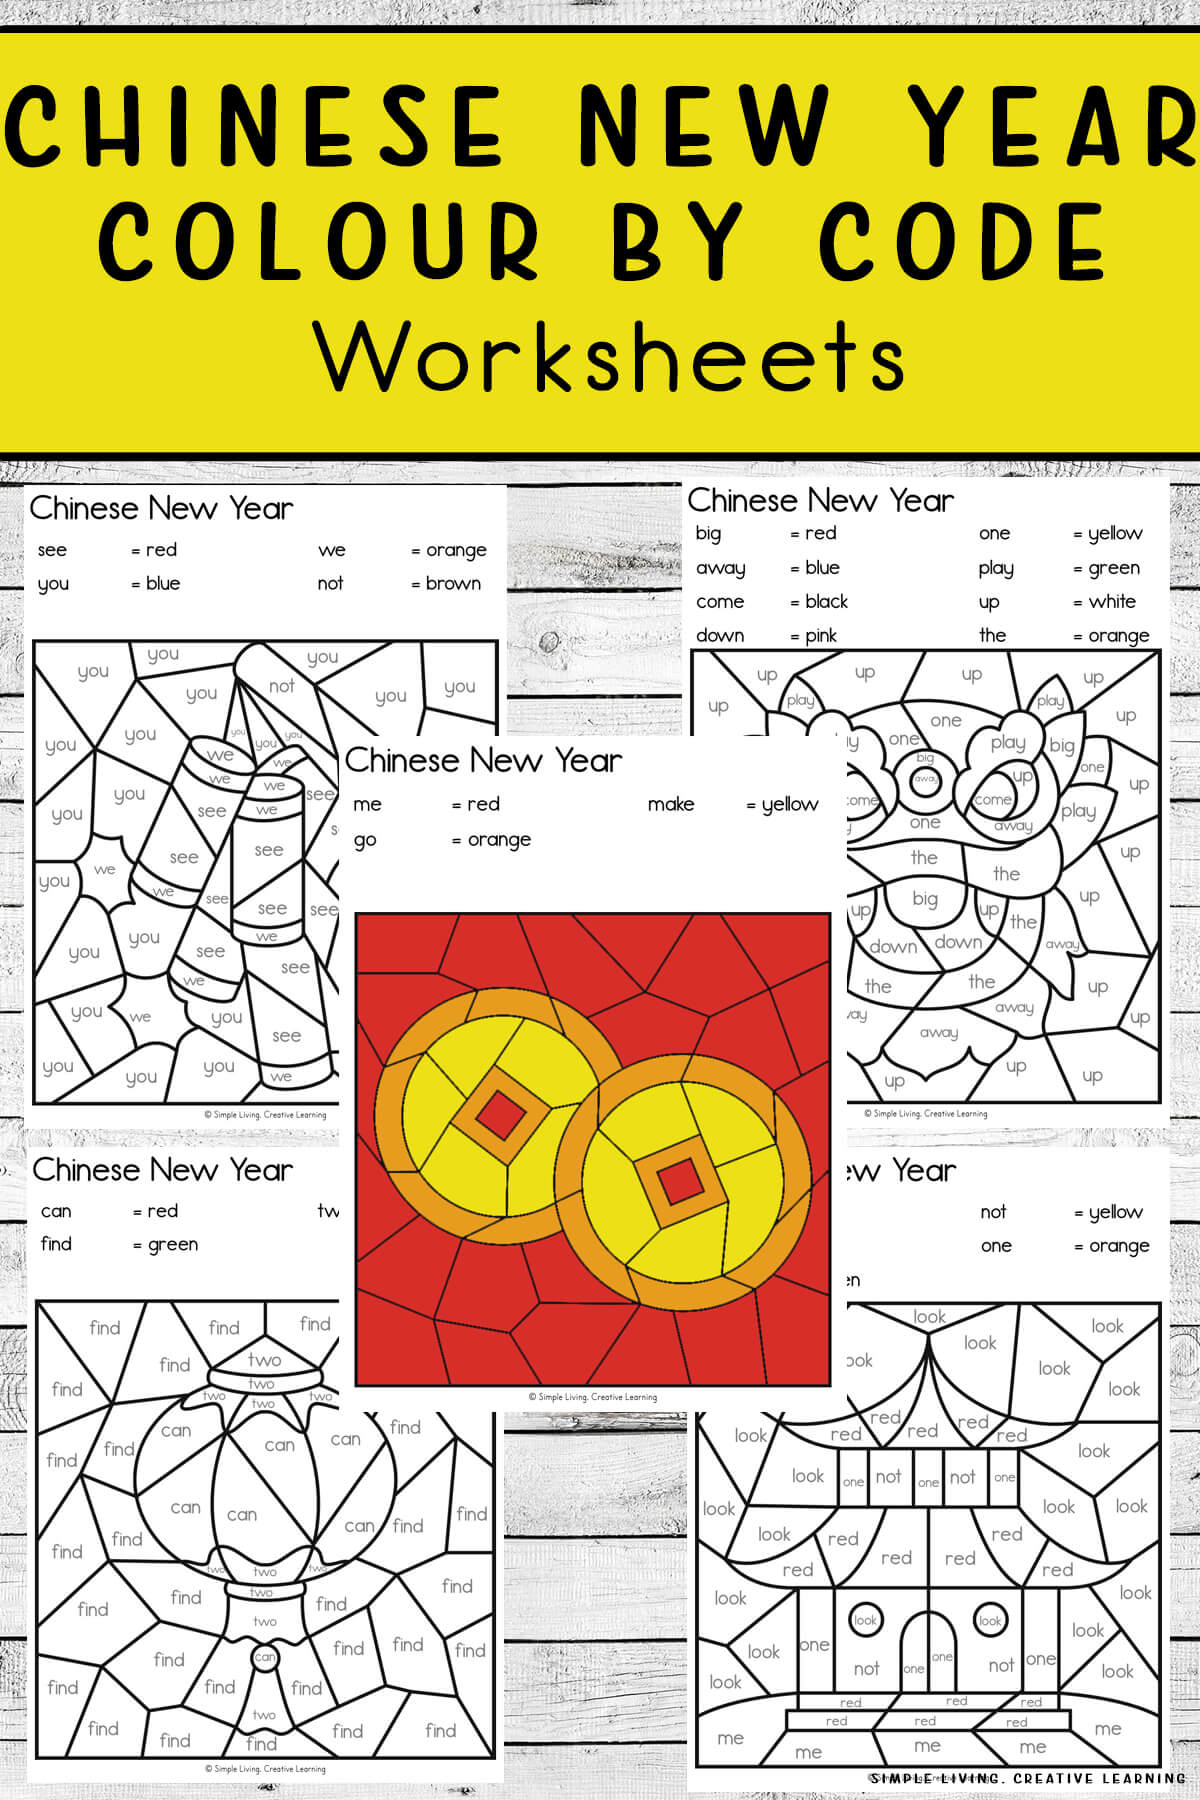 Chinese New Year Colour By Code Worksheets